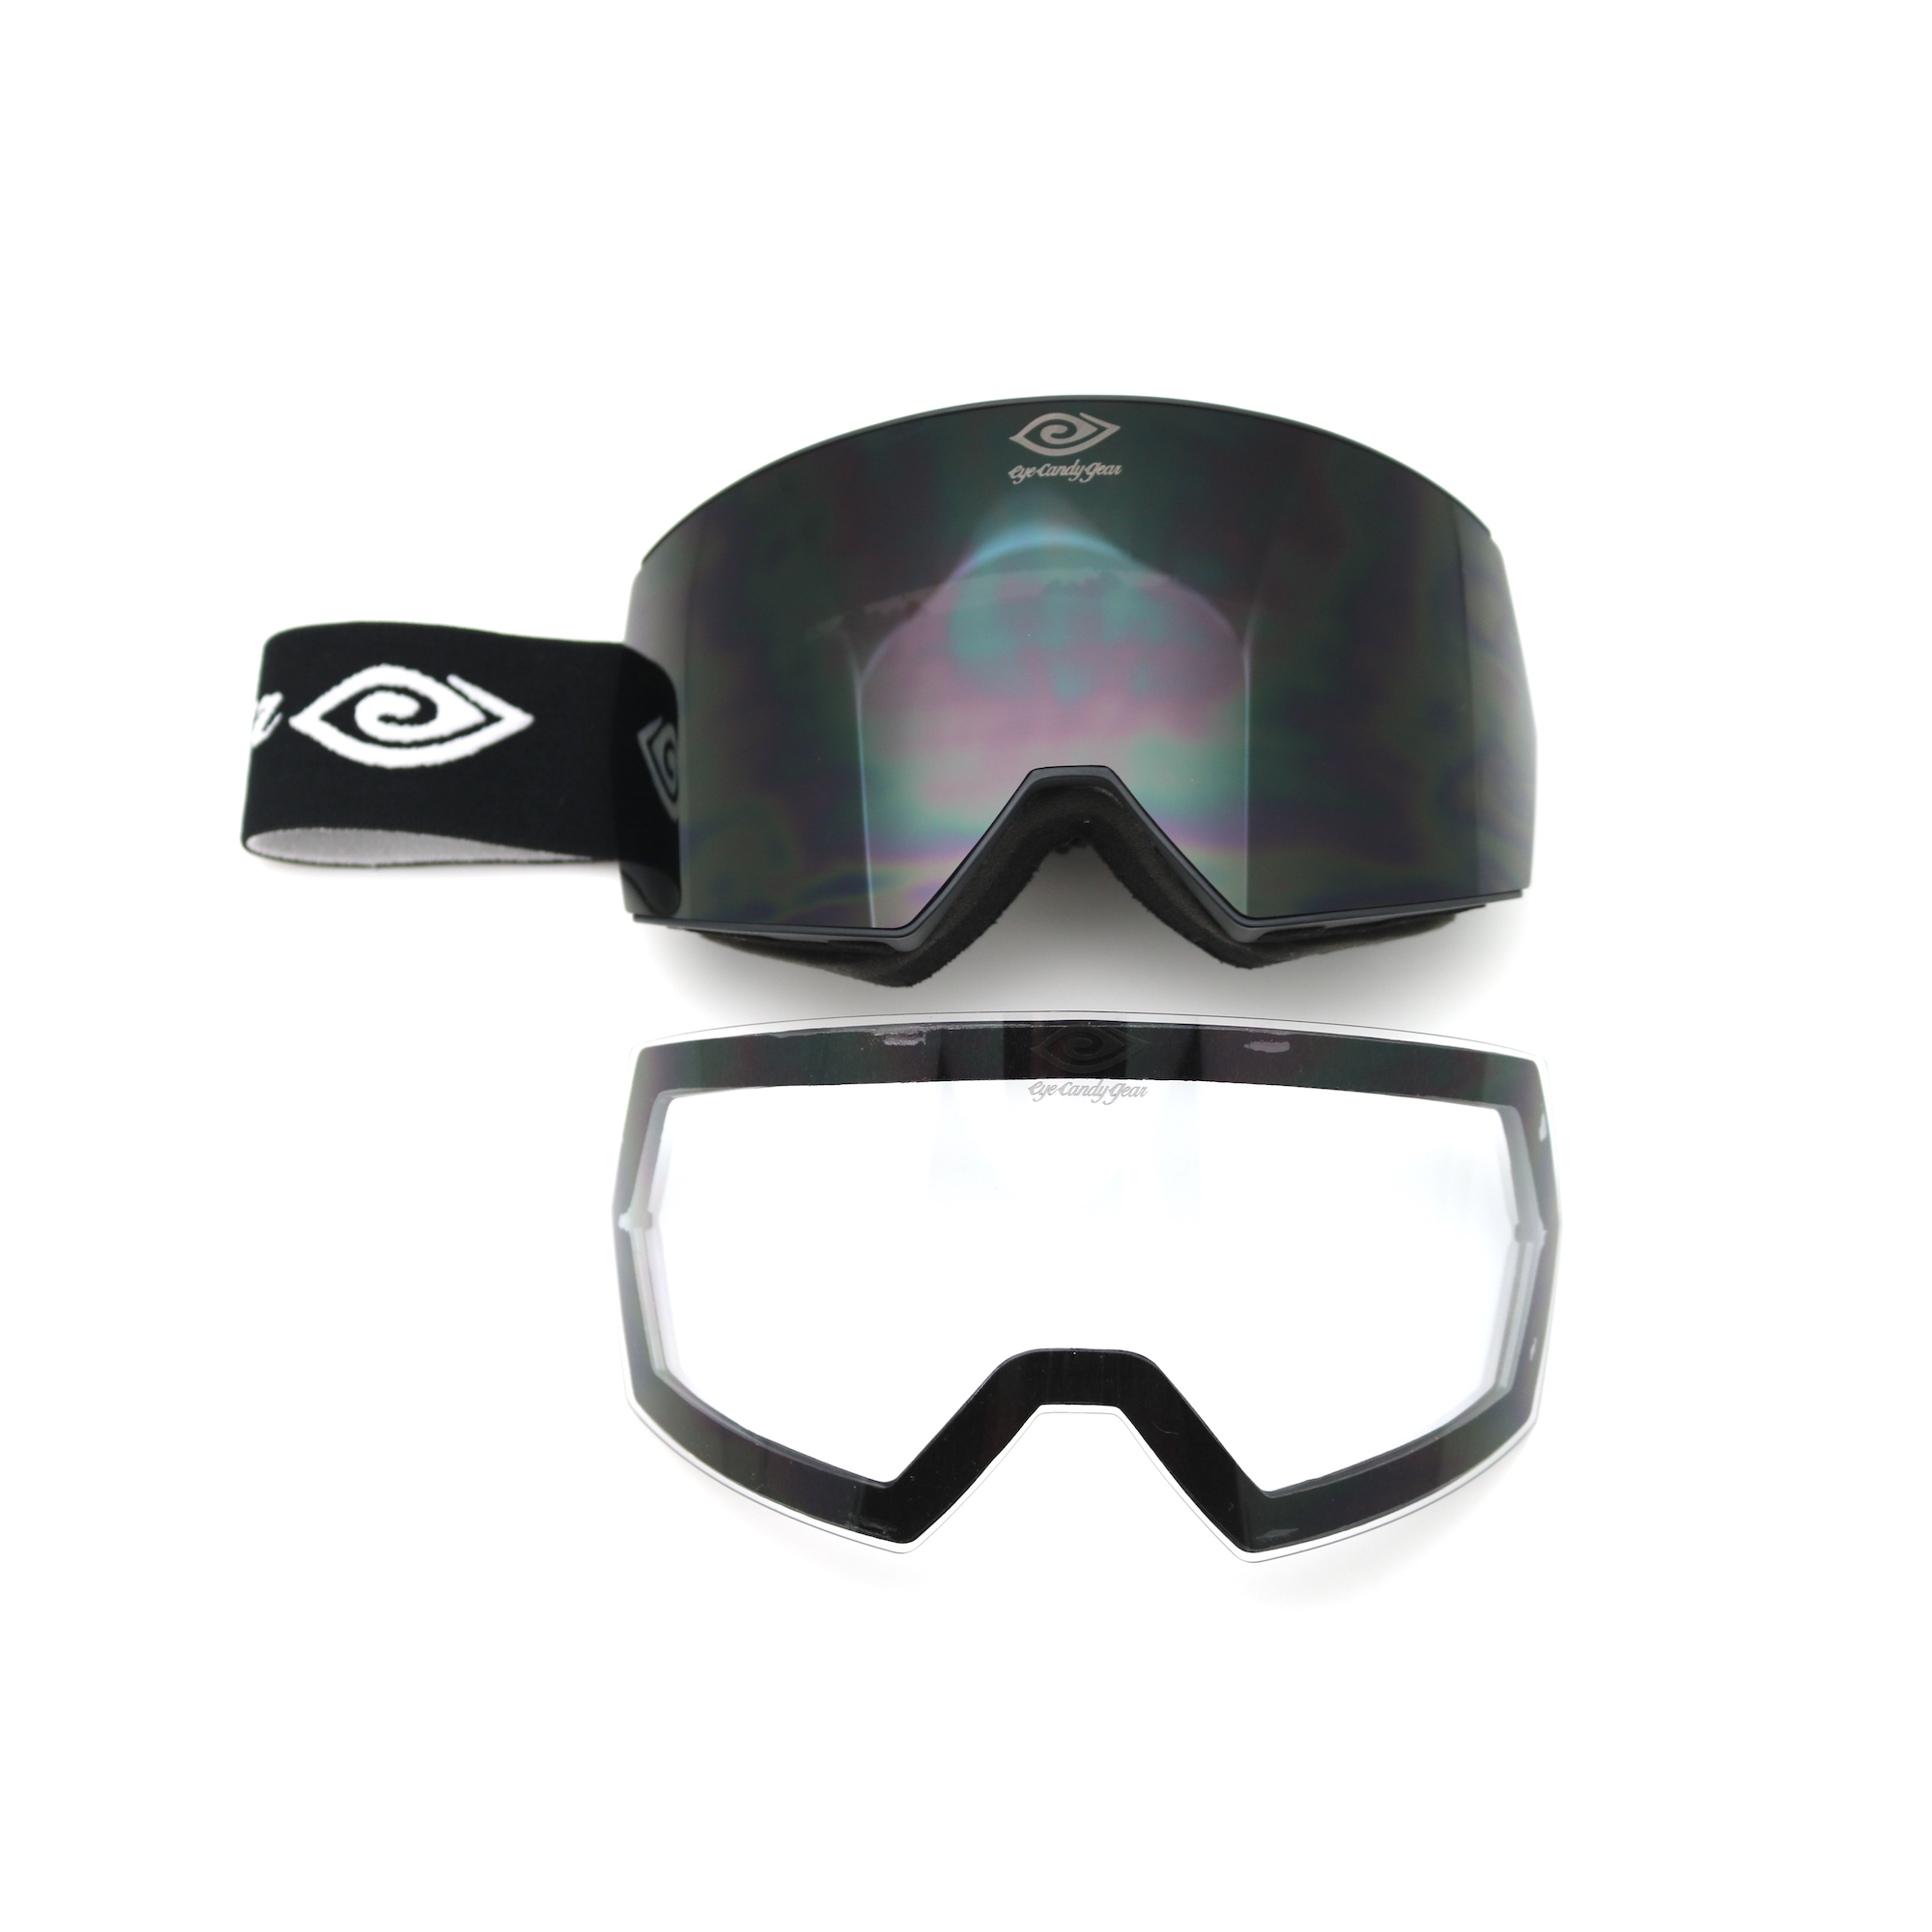 Double Black - Candy Goggles Snow Eye Magnetized – (Interchangeable - Gear Lenses)